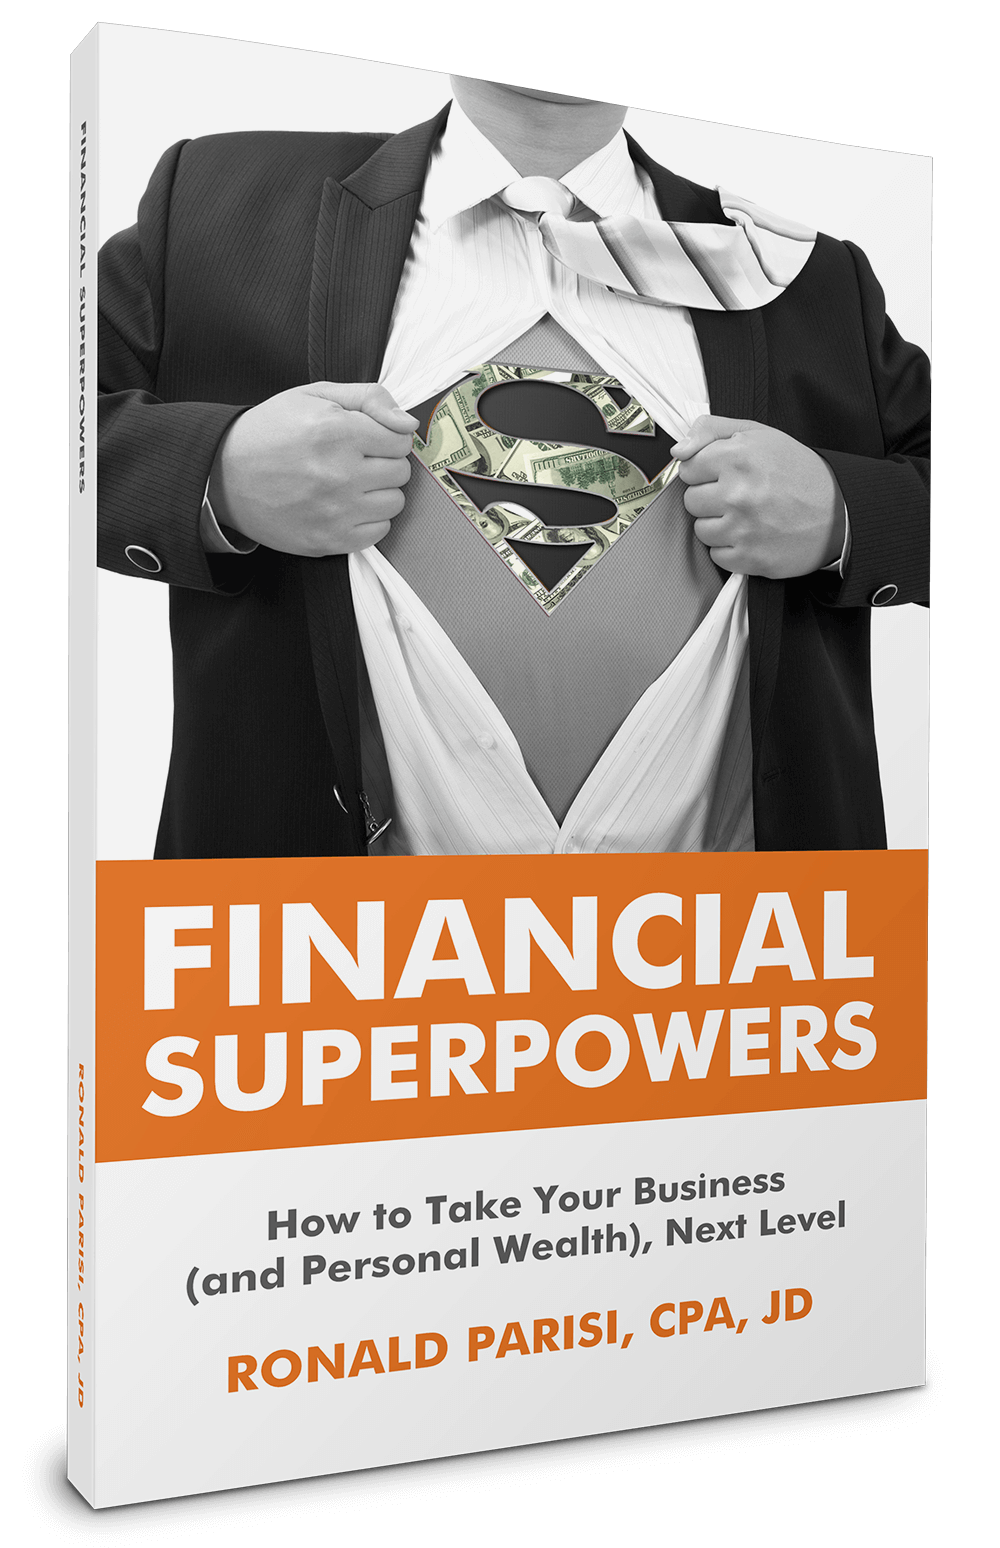 Financial Superpowers book pdf img